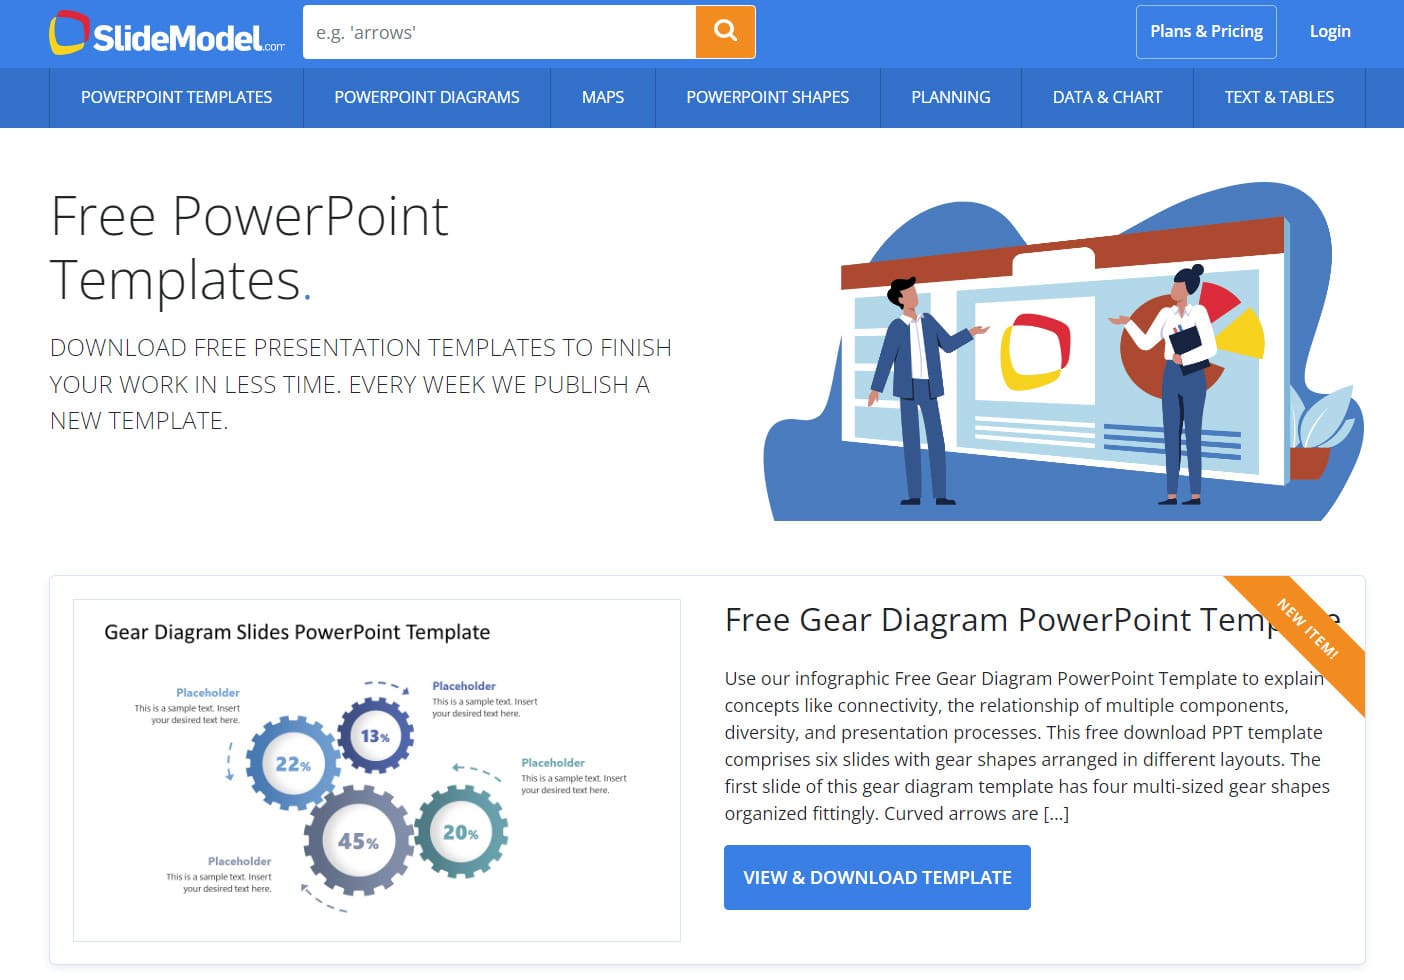 Download free PowerPoint templates from SlideModel